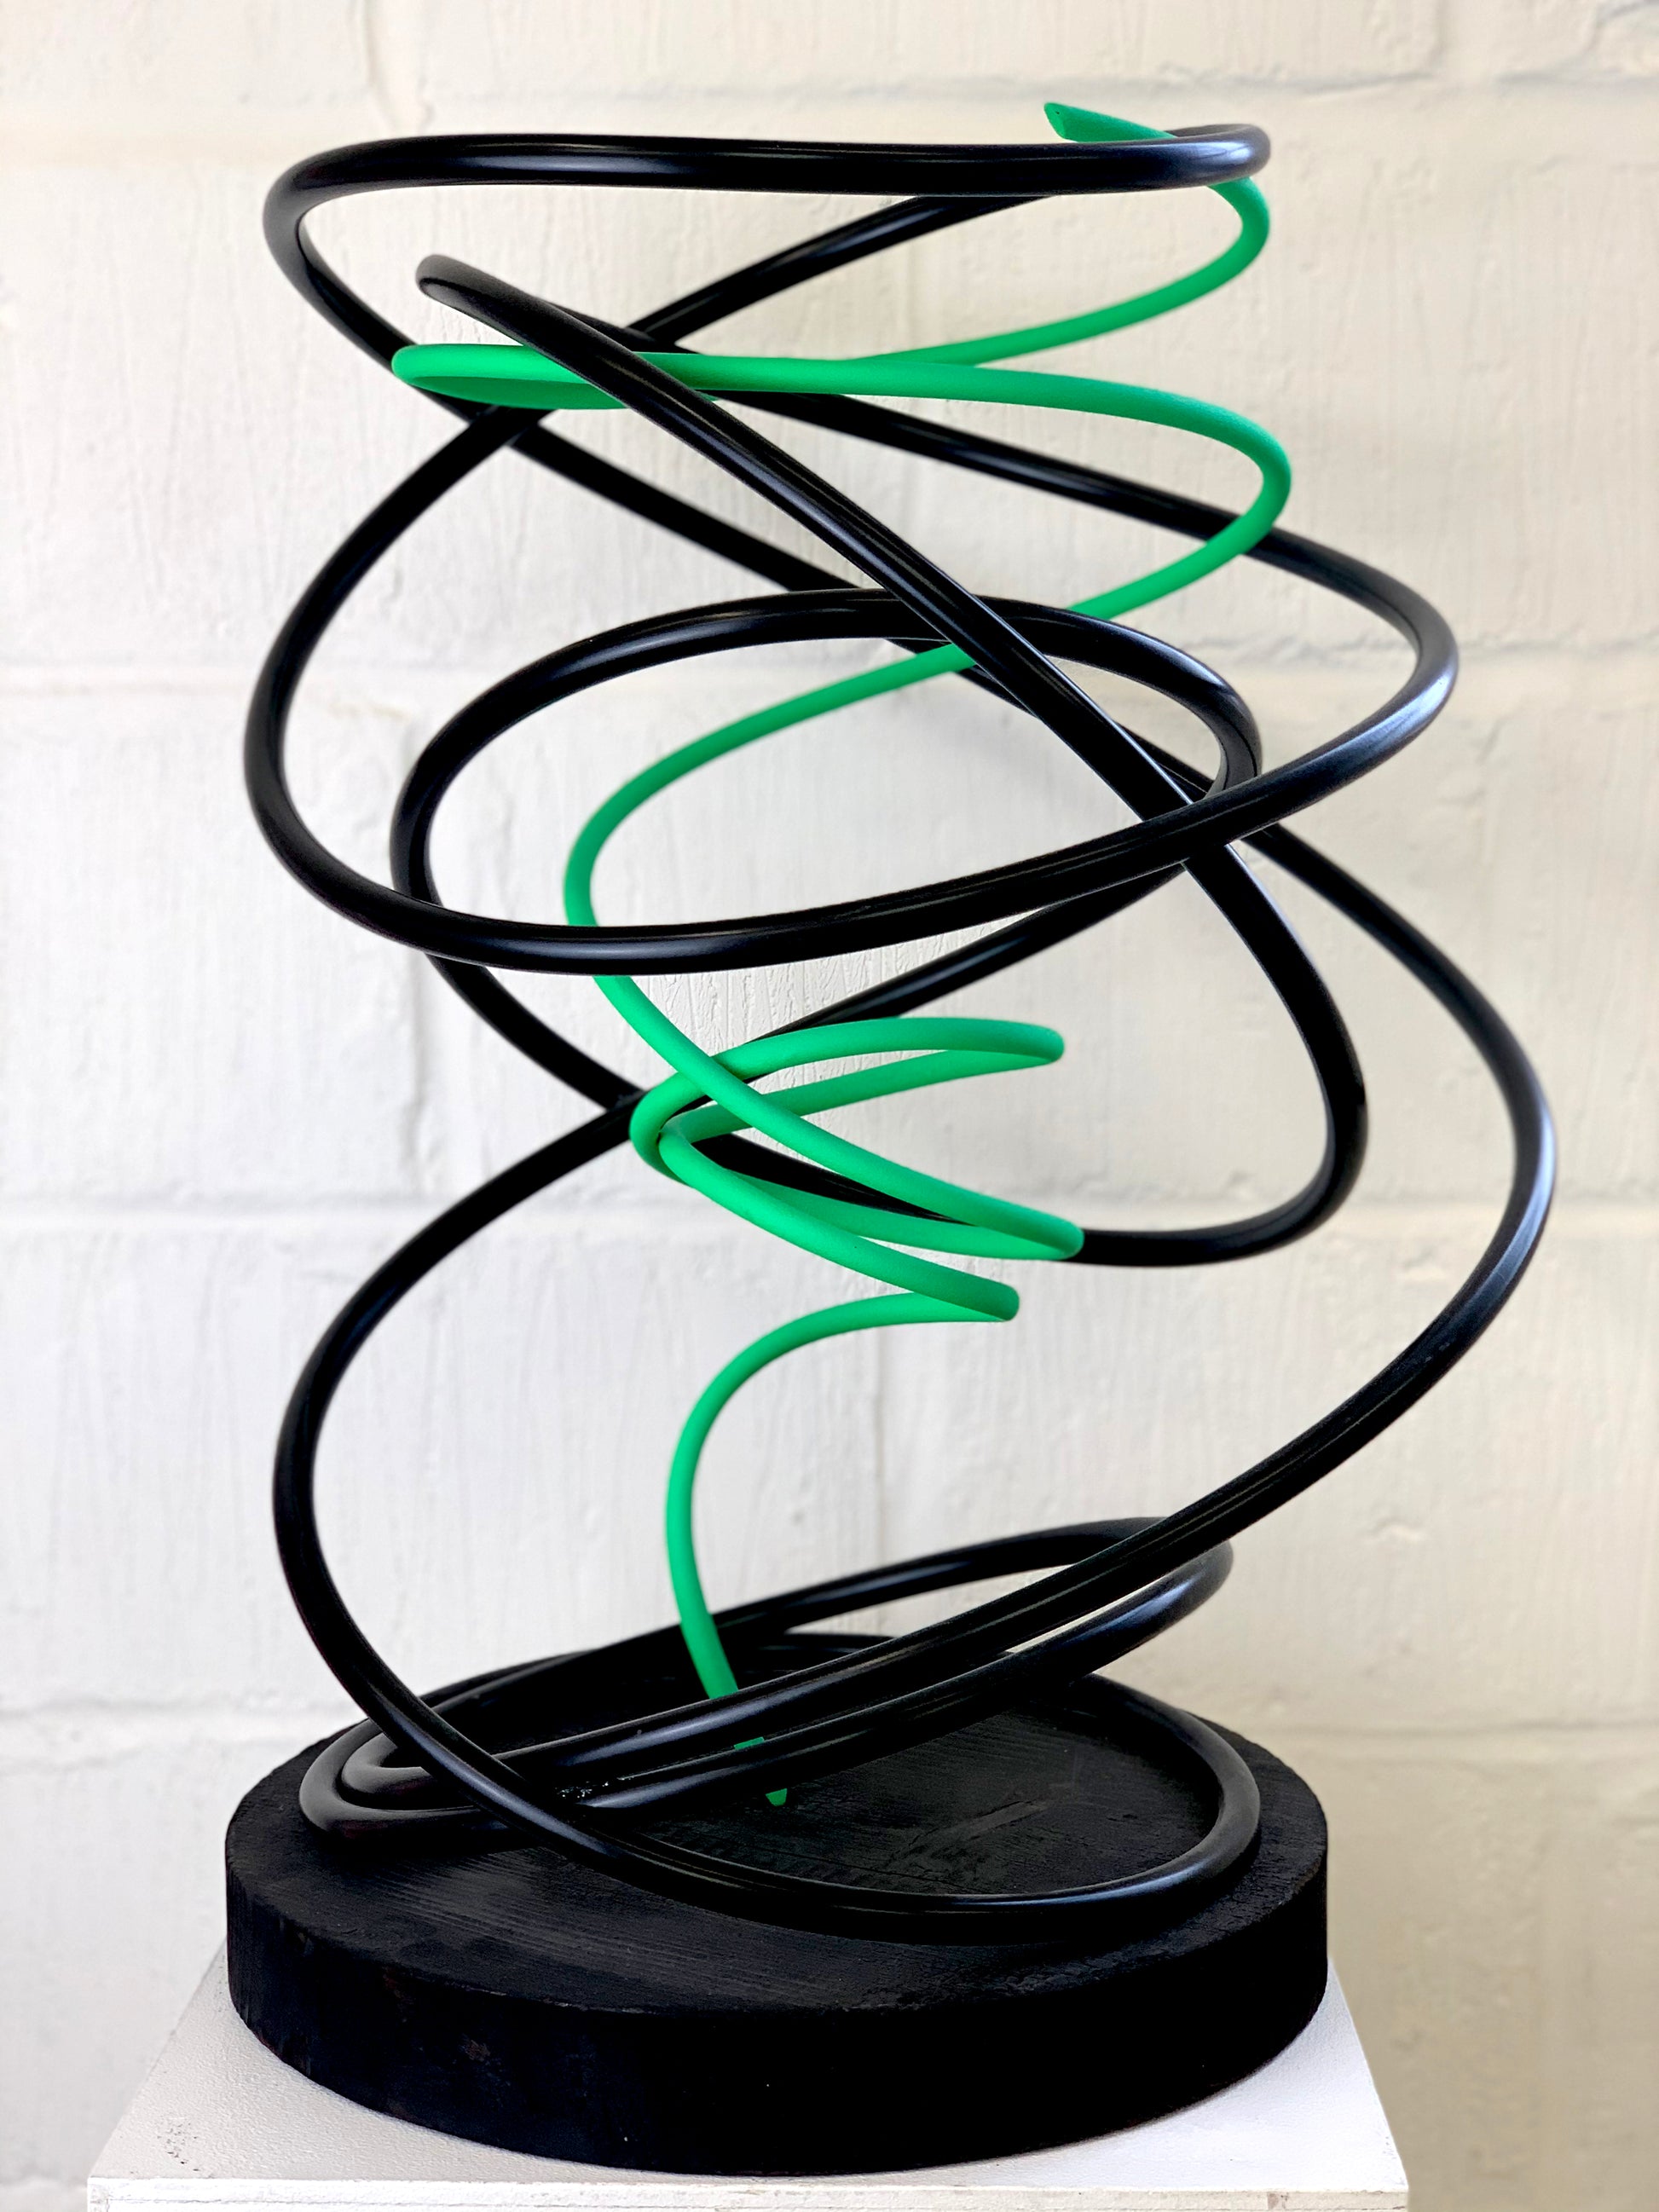 Mark Beattie's Green in Black Spiral, an extraordinary sculpture crafted from painted copper on a burnt plinth. Measuring 68 x 45 x 45 cm